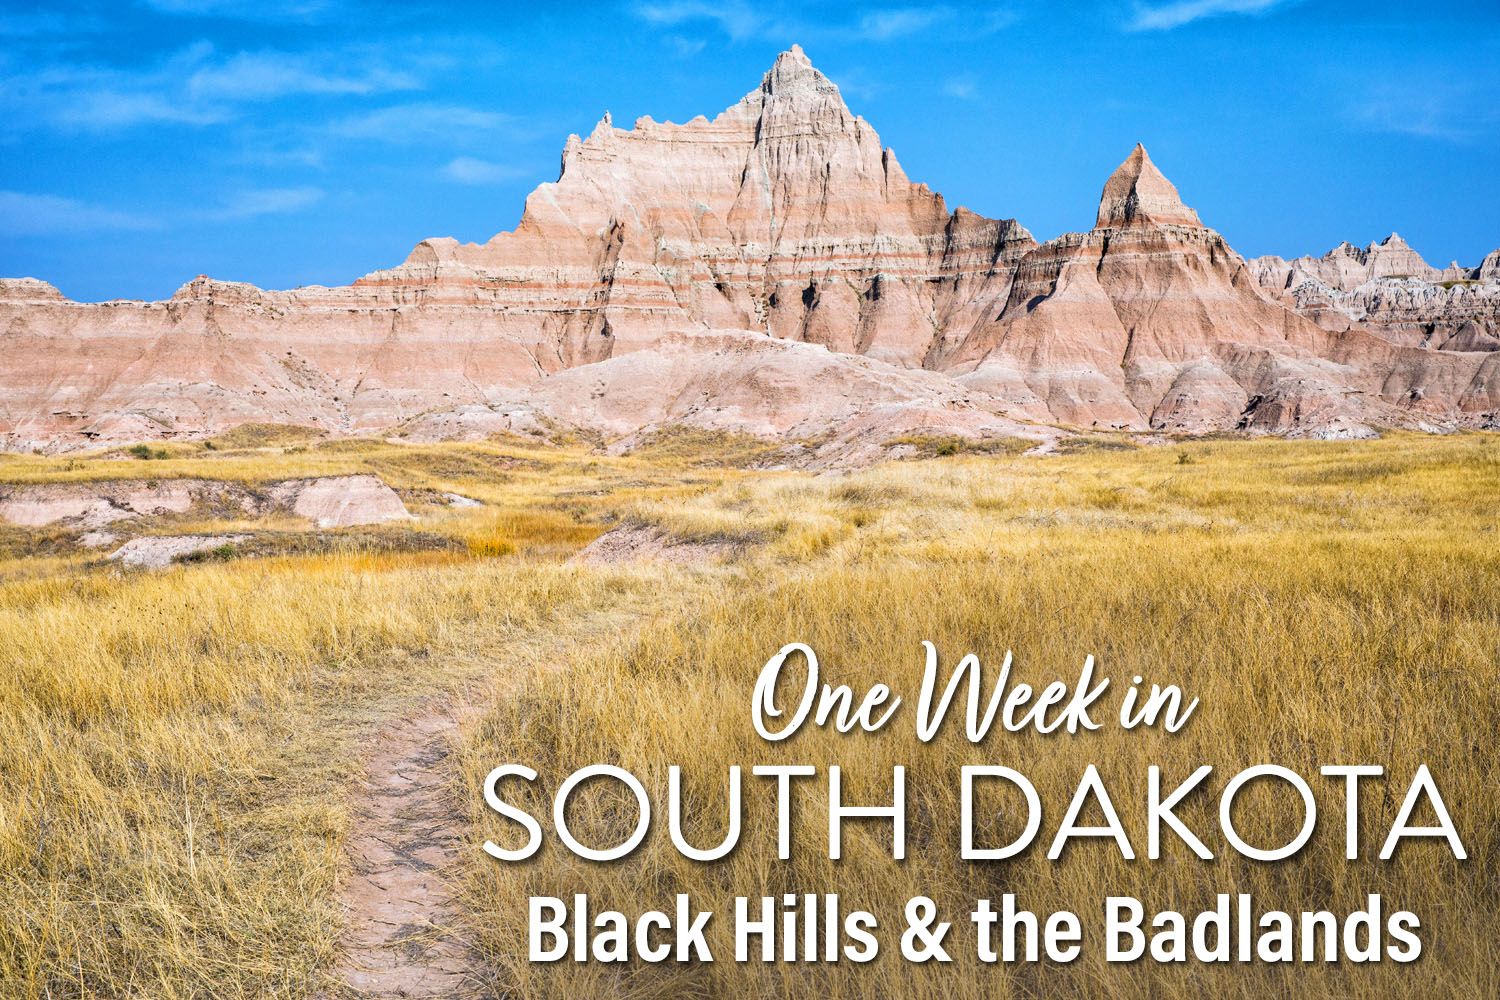 Hikes in the Badlands